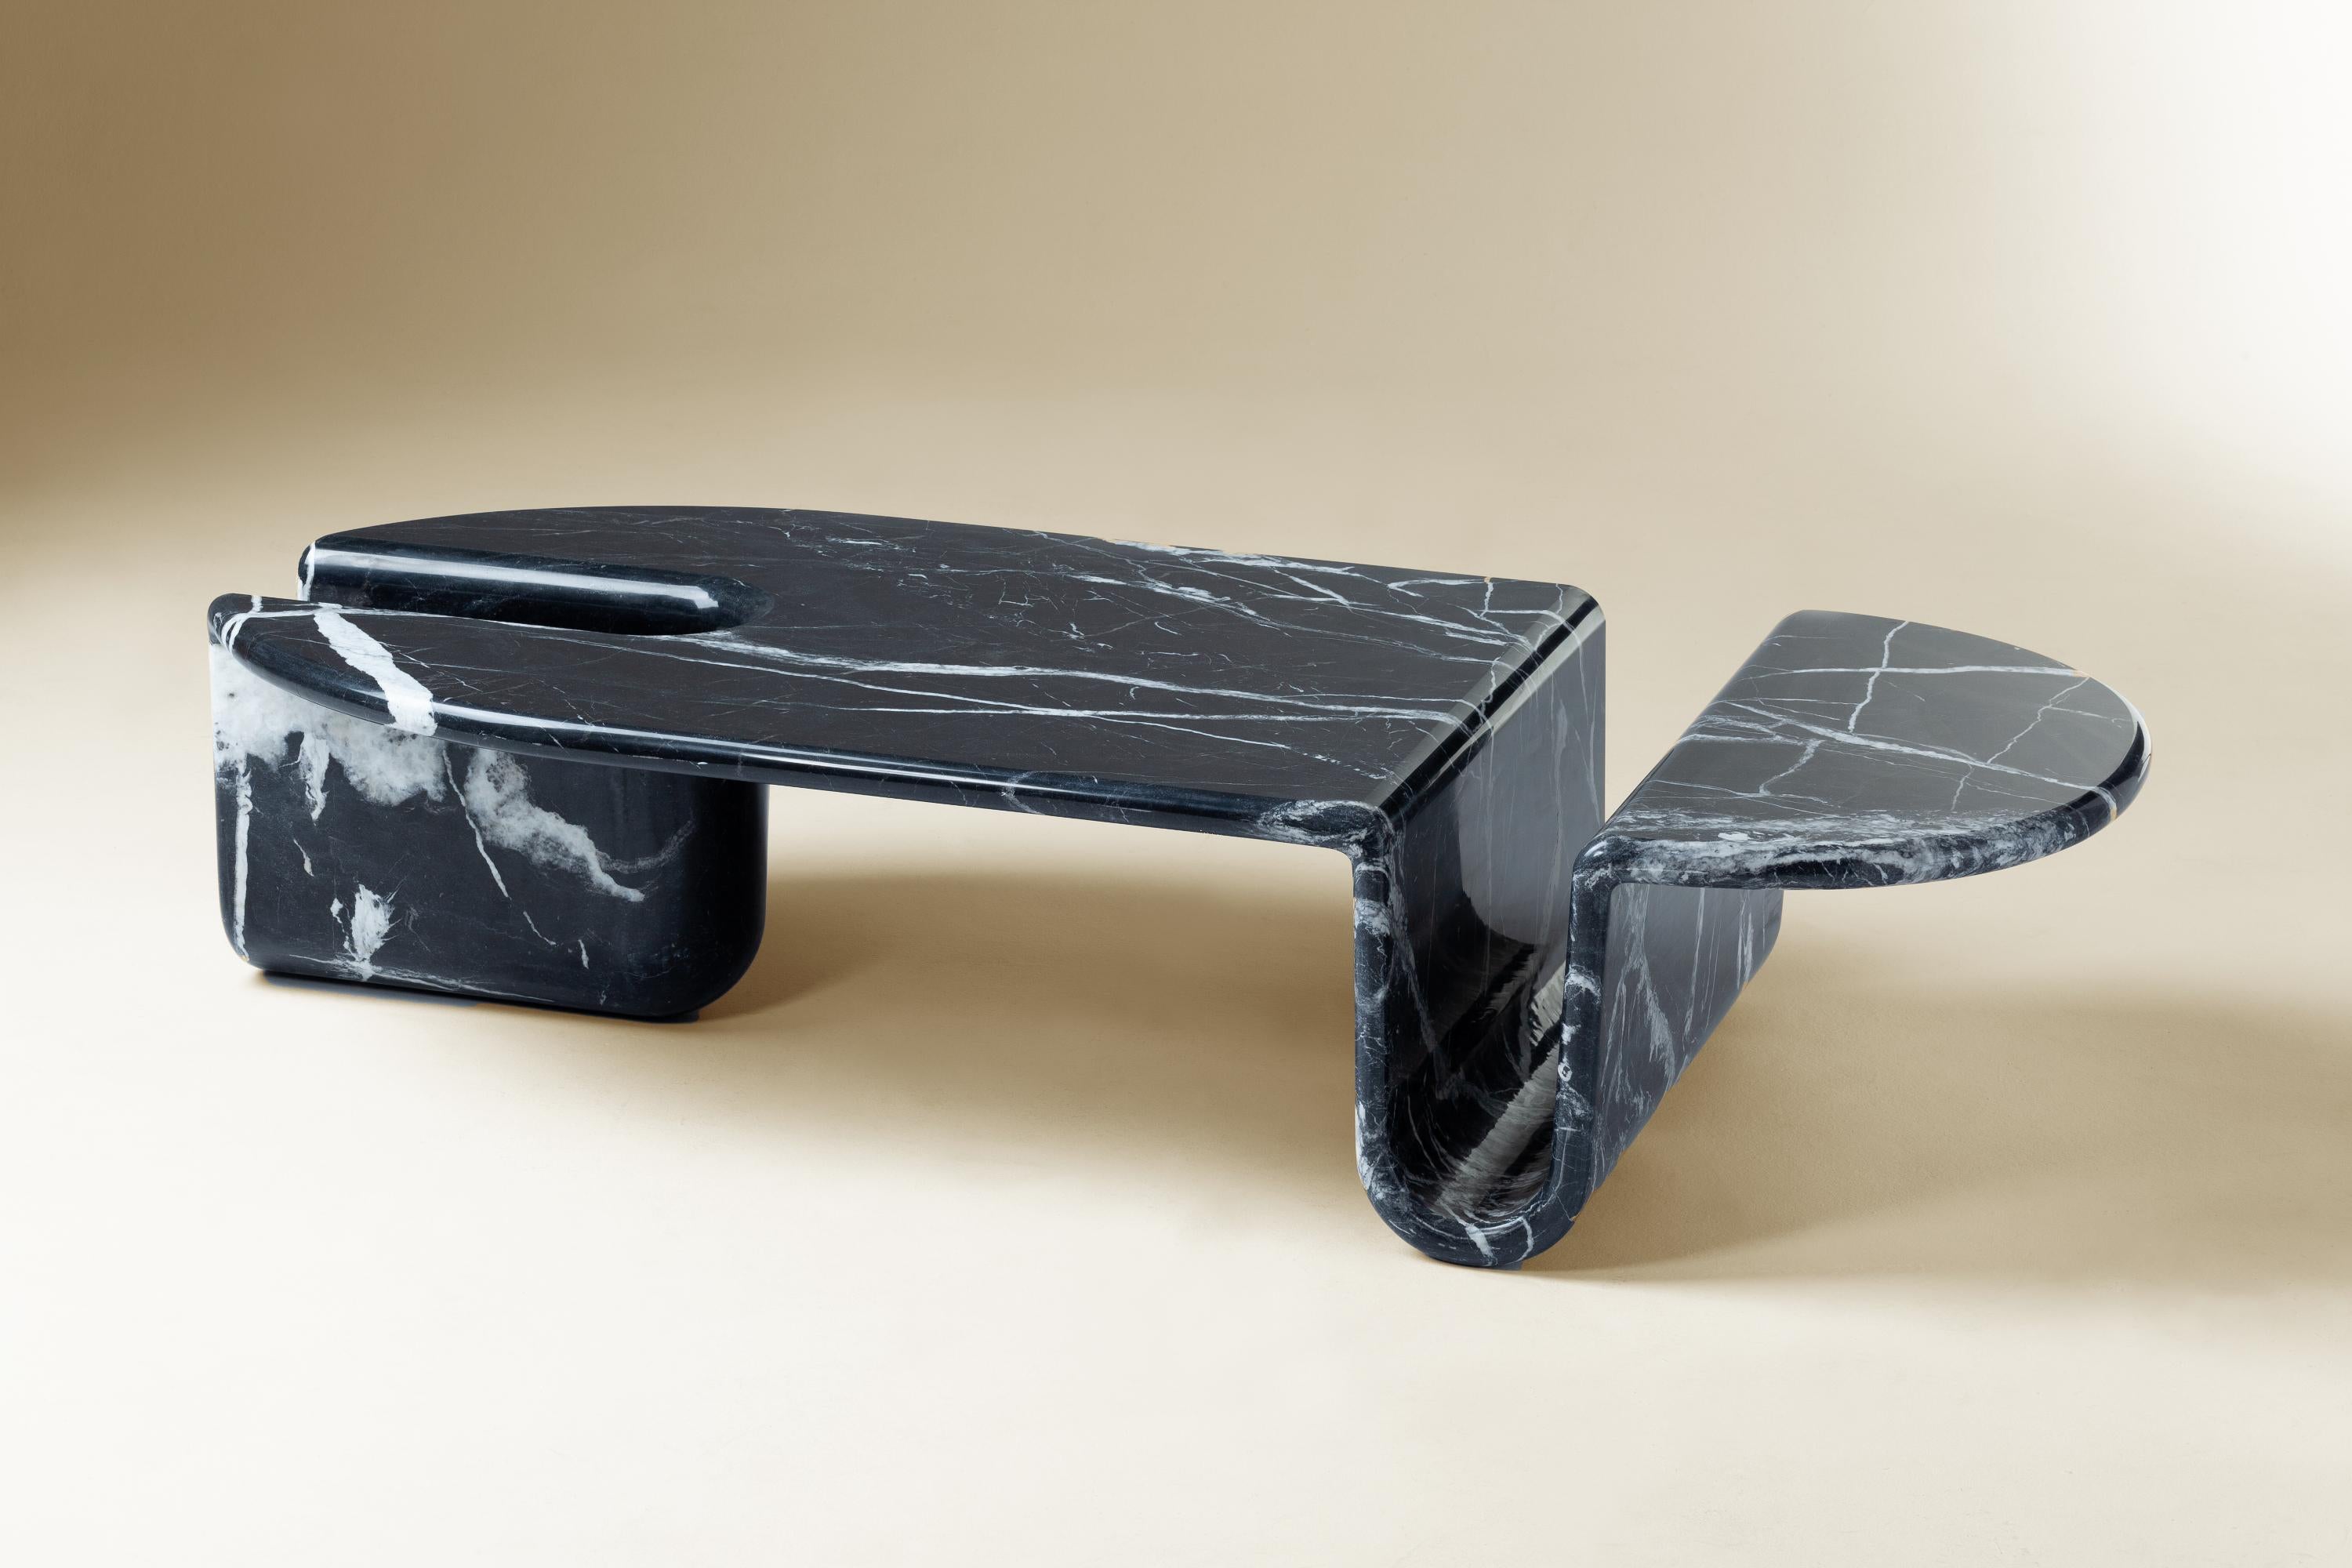 Bonnie & Clyde Nero Marquina marble center table by Dooq
Measures: W 160 cm 63”
D 70 cm 28”
H 35 cm 14”

Materials: structure carved from one solid marble piece

Dooq is a design company dedicated to celebrate the luxury of living. Creating